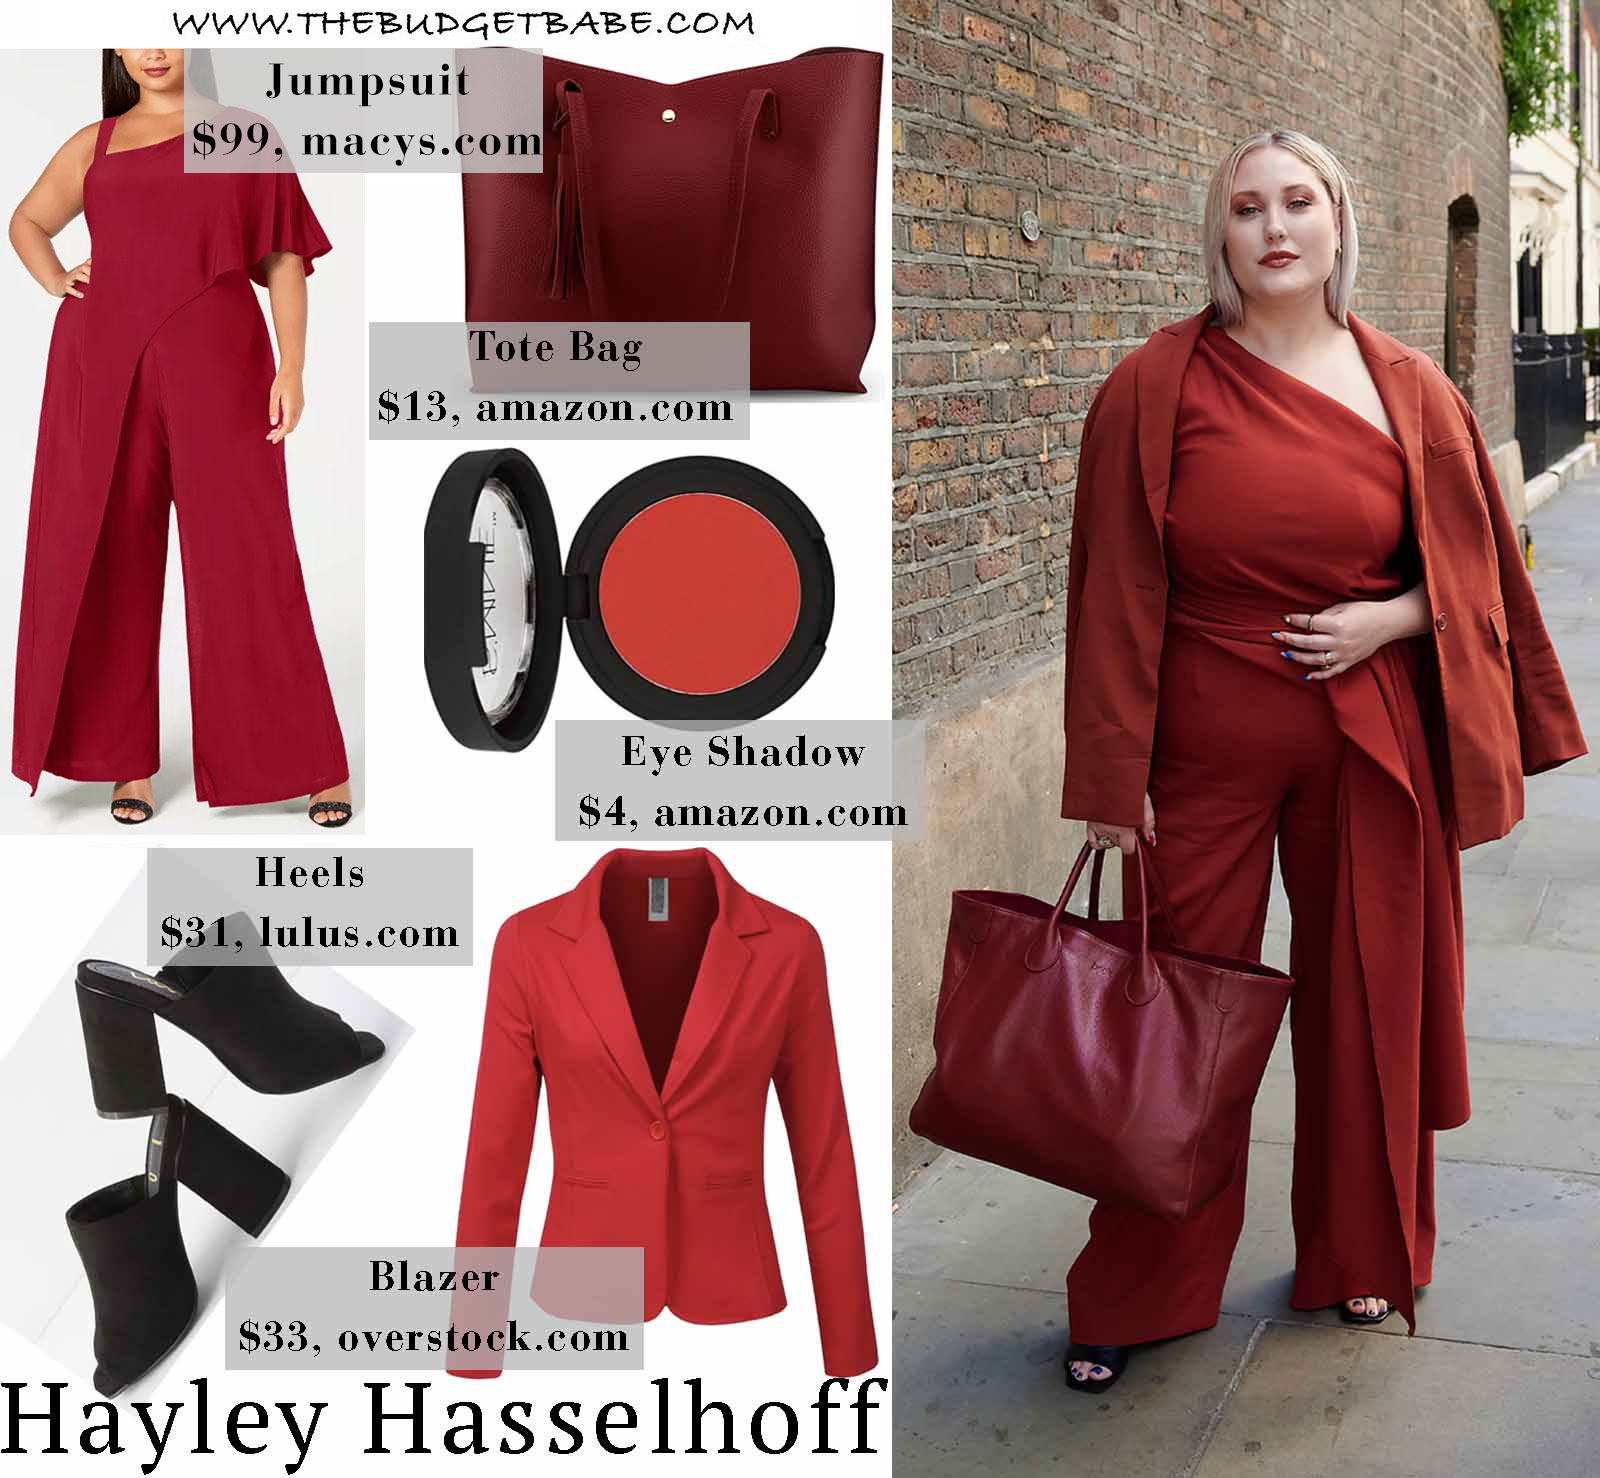 Get the Look: Hayley Hasselhoff's One Shoulder Draped Jumpsuit and Matching Blazer